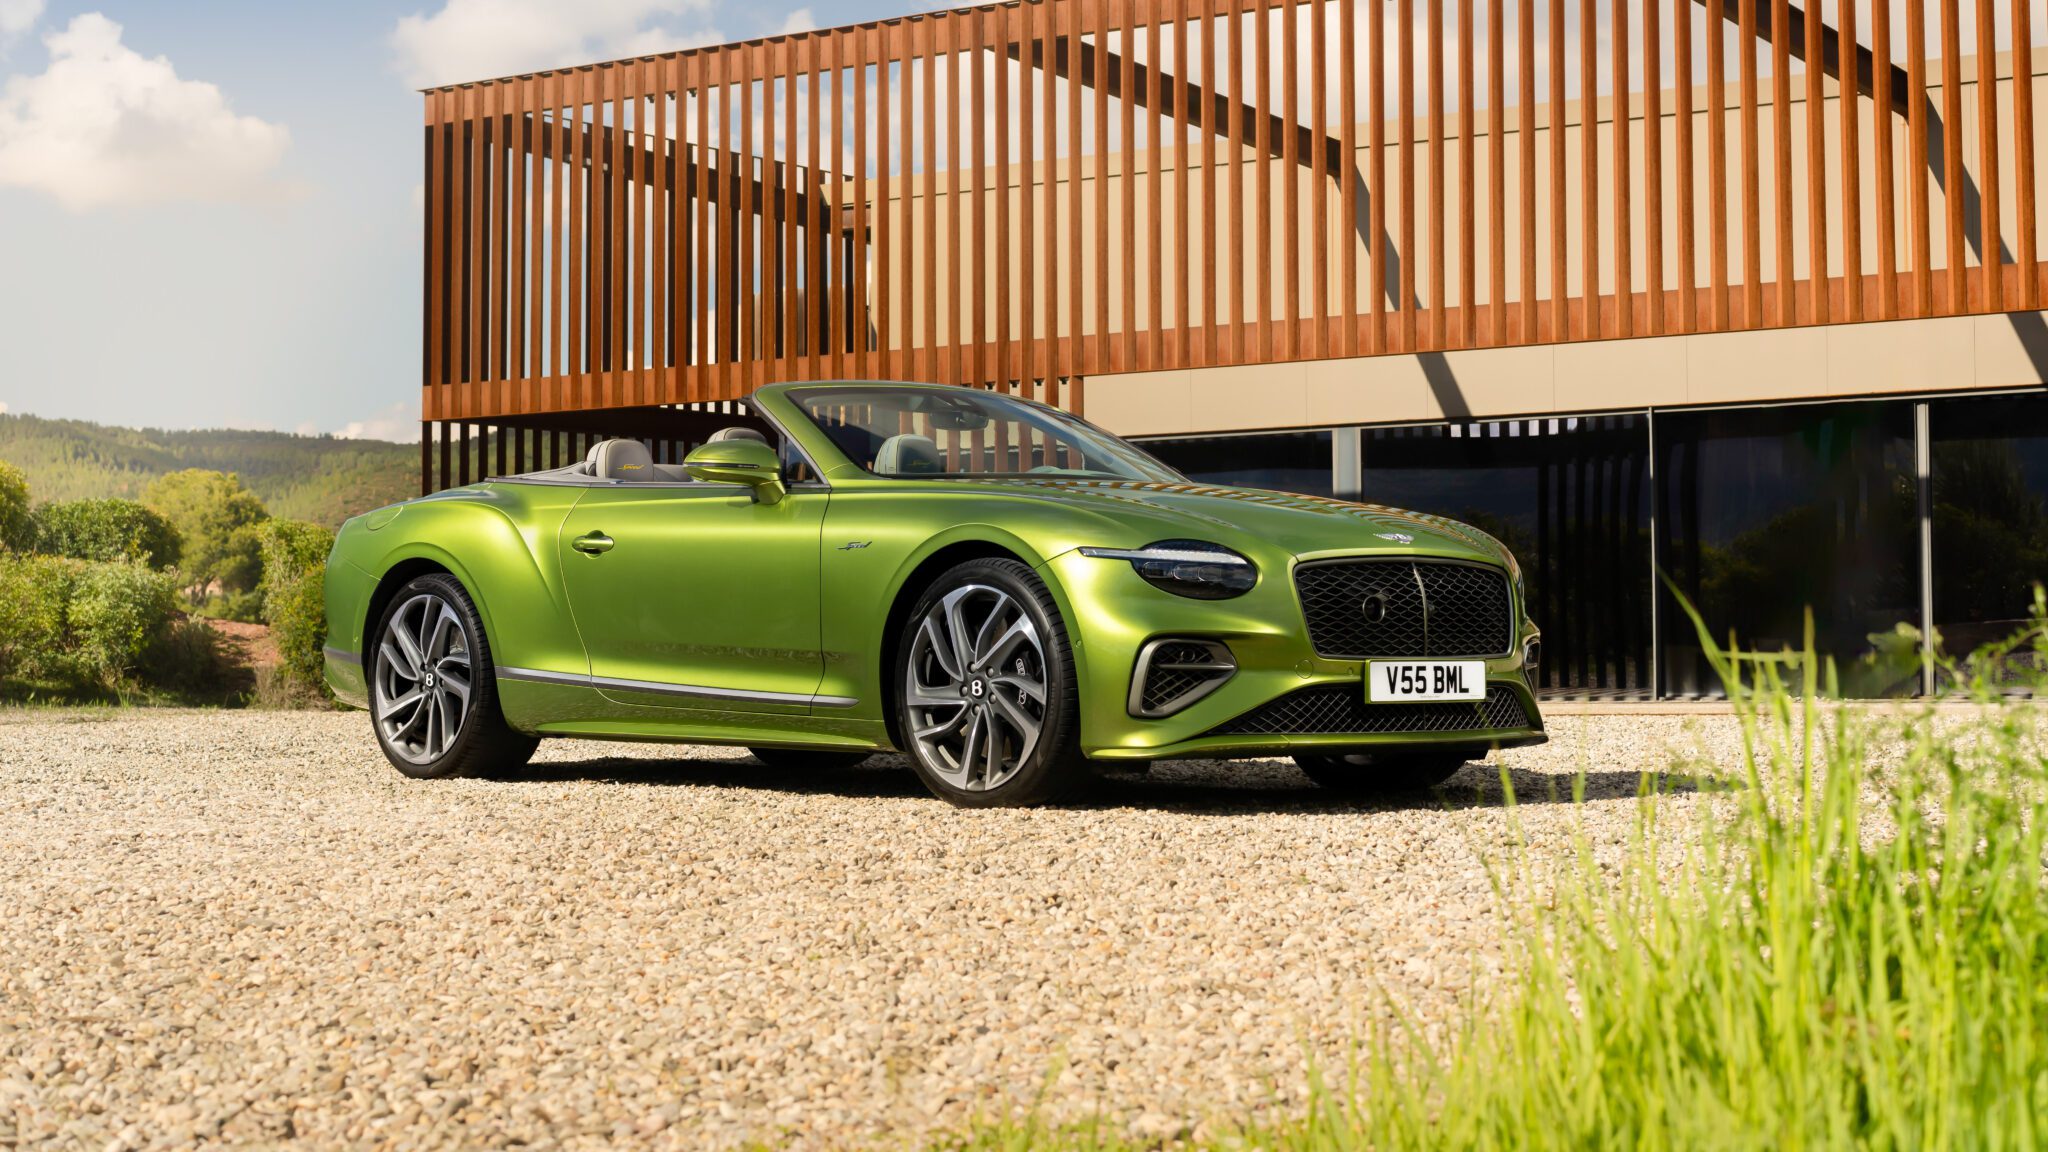 An image of the 2025 Bentley Continental GT parked outdoors.